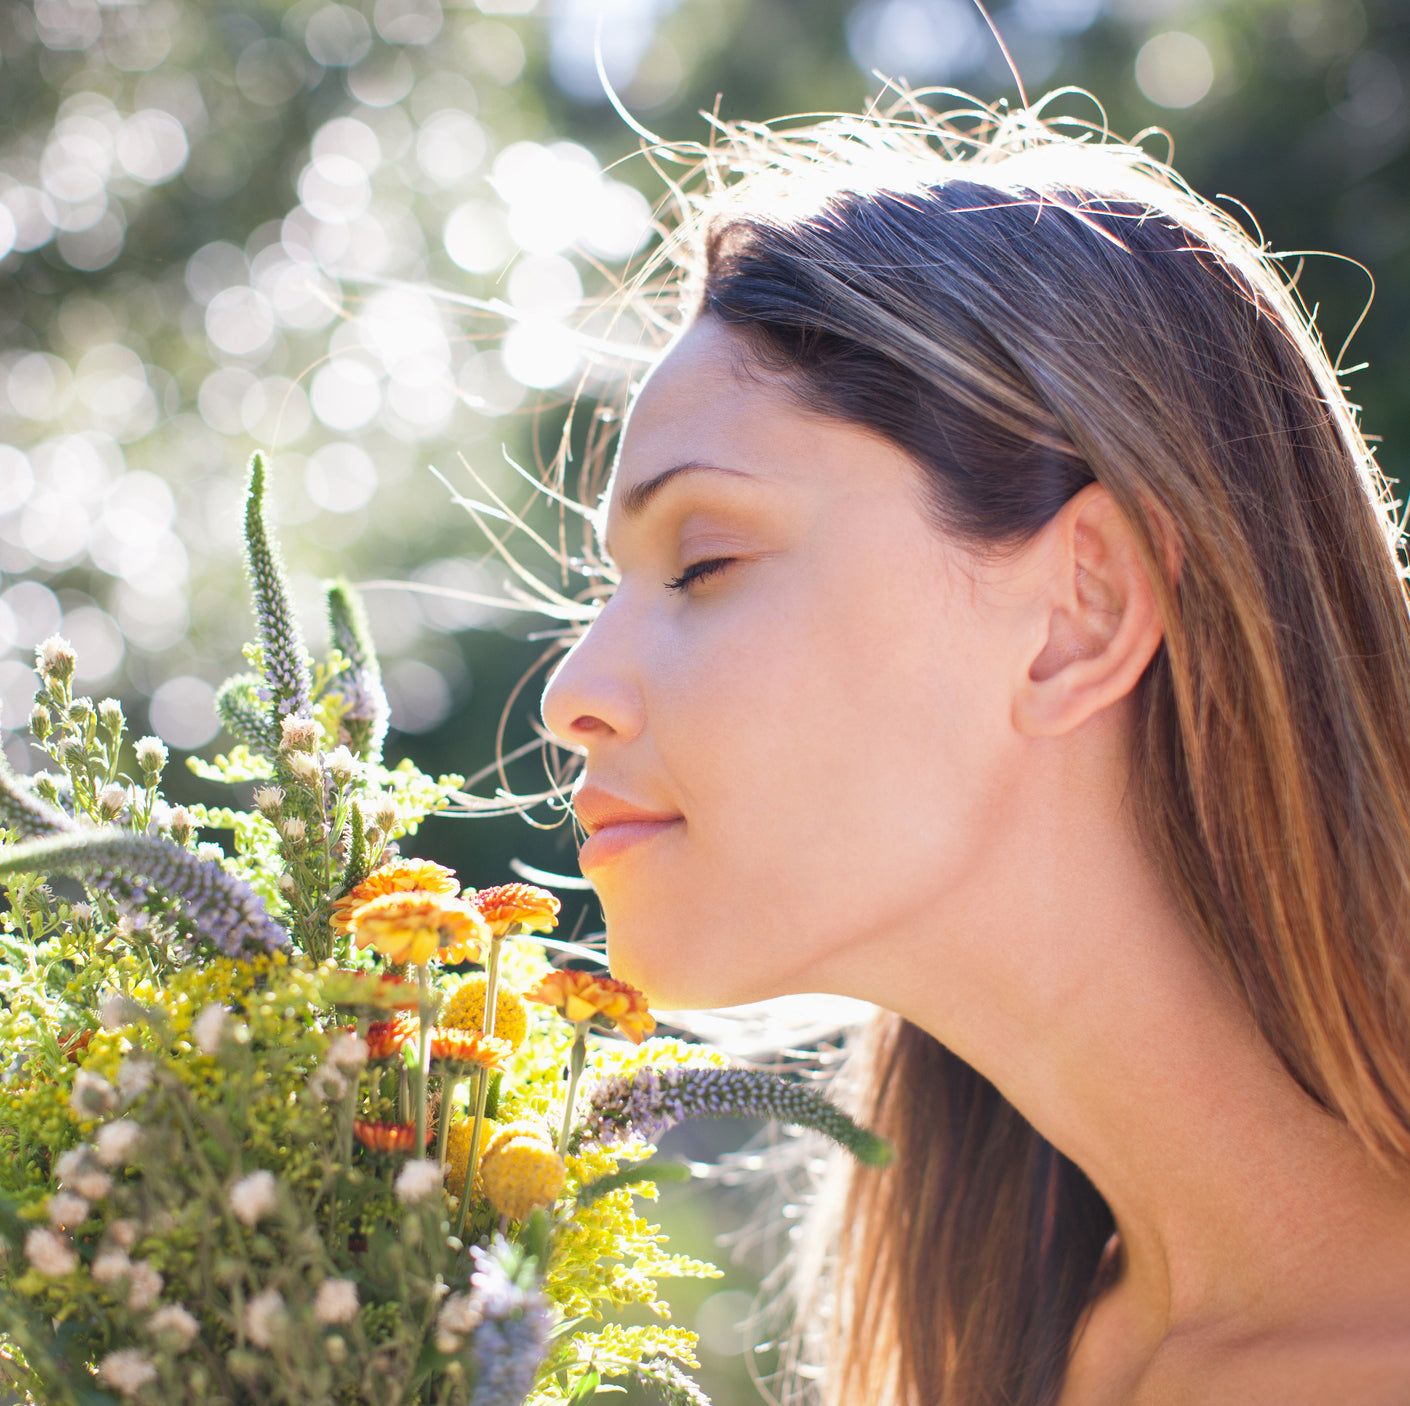 woman smelling ethically sourced and natural wildflowers